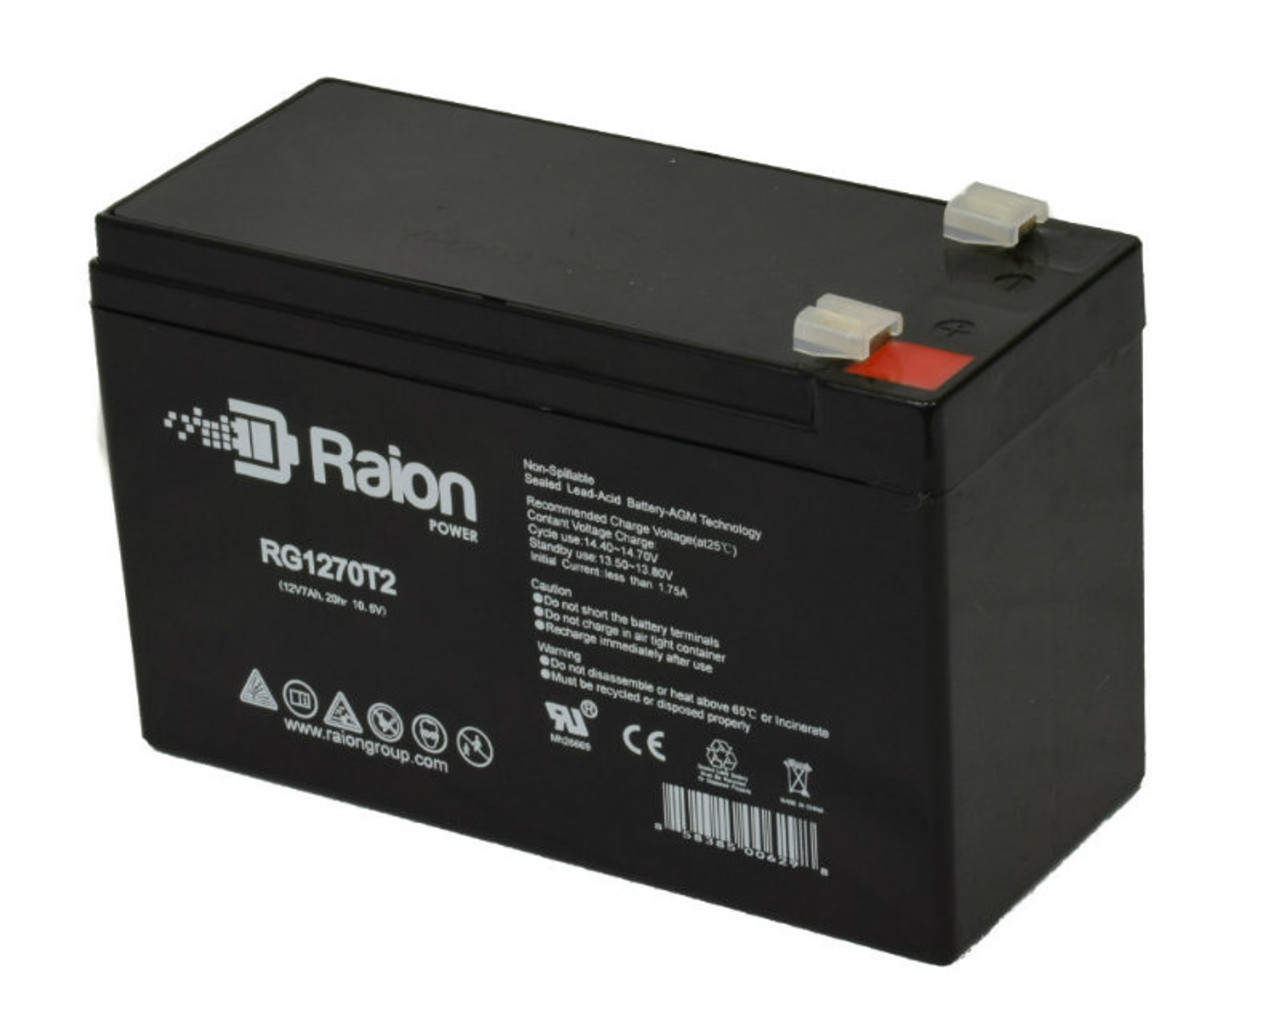 Raion Power RG1270T1 12V 7Ah Non-Spillable Replacement Battery for Consent GS126